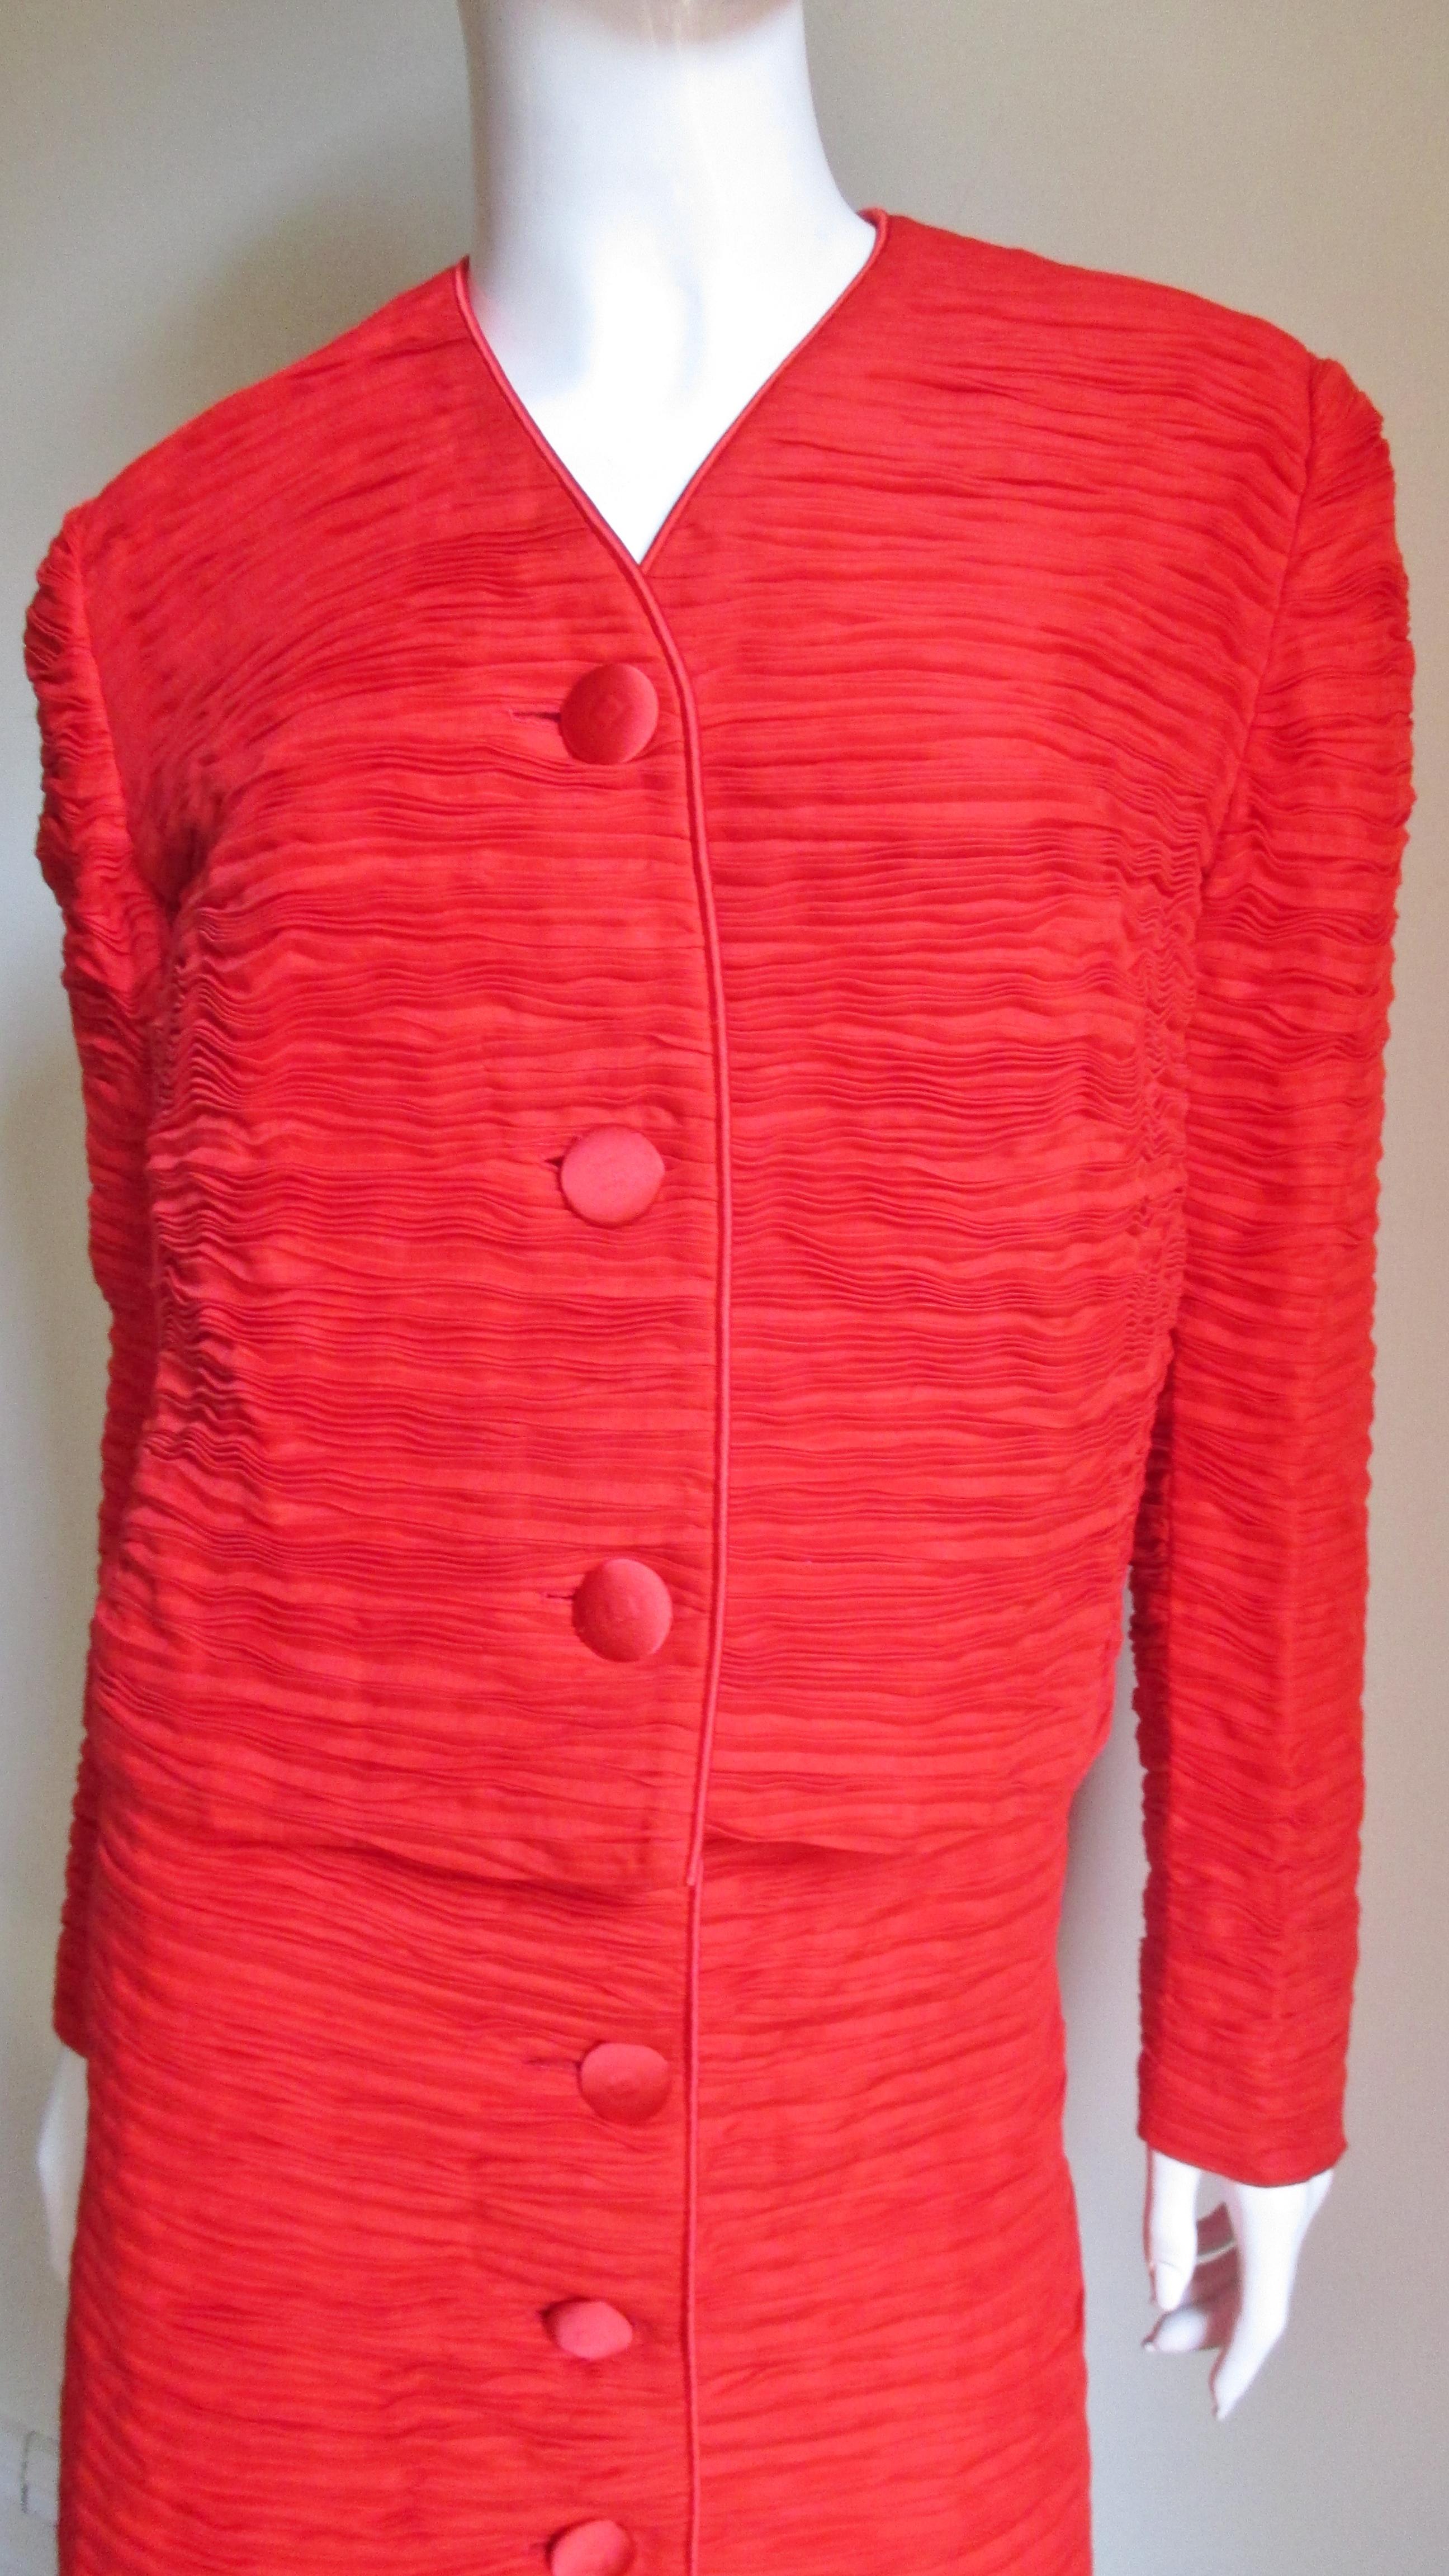 An incredible red suit in intricately pleated fine linen made famous by Sybil Connolly. The jacket closes in front with matching silk buttons, bound buttonholes with matching silk piping around the V neckline and along the center front.  The A line